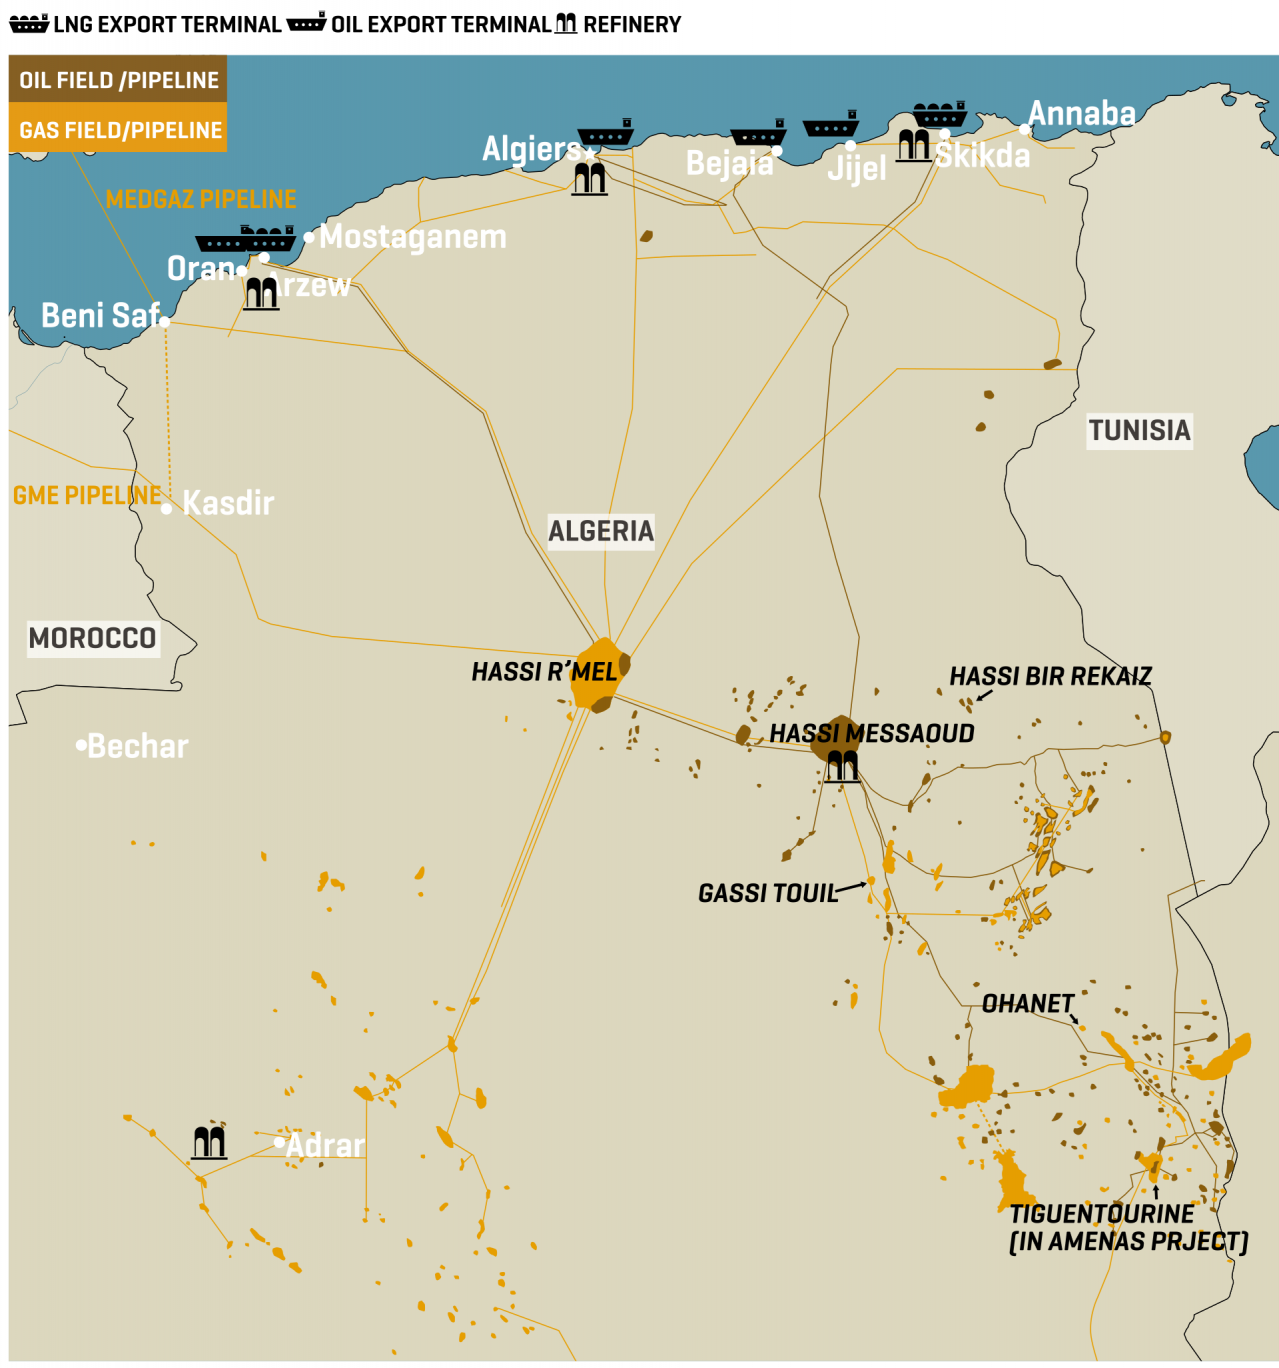 Algeria’s Key Oil And Gas Infrastructure